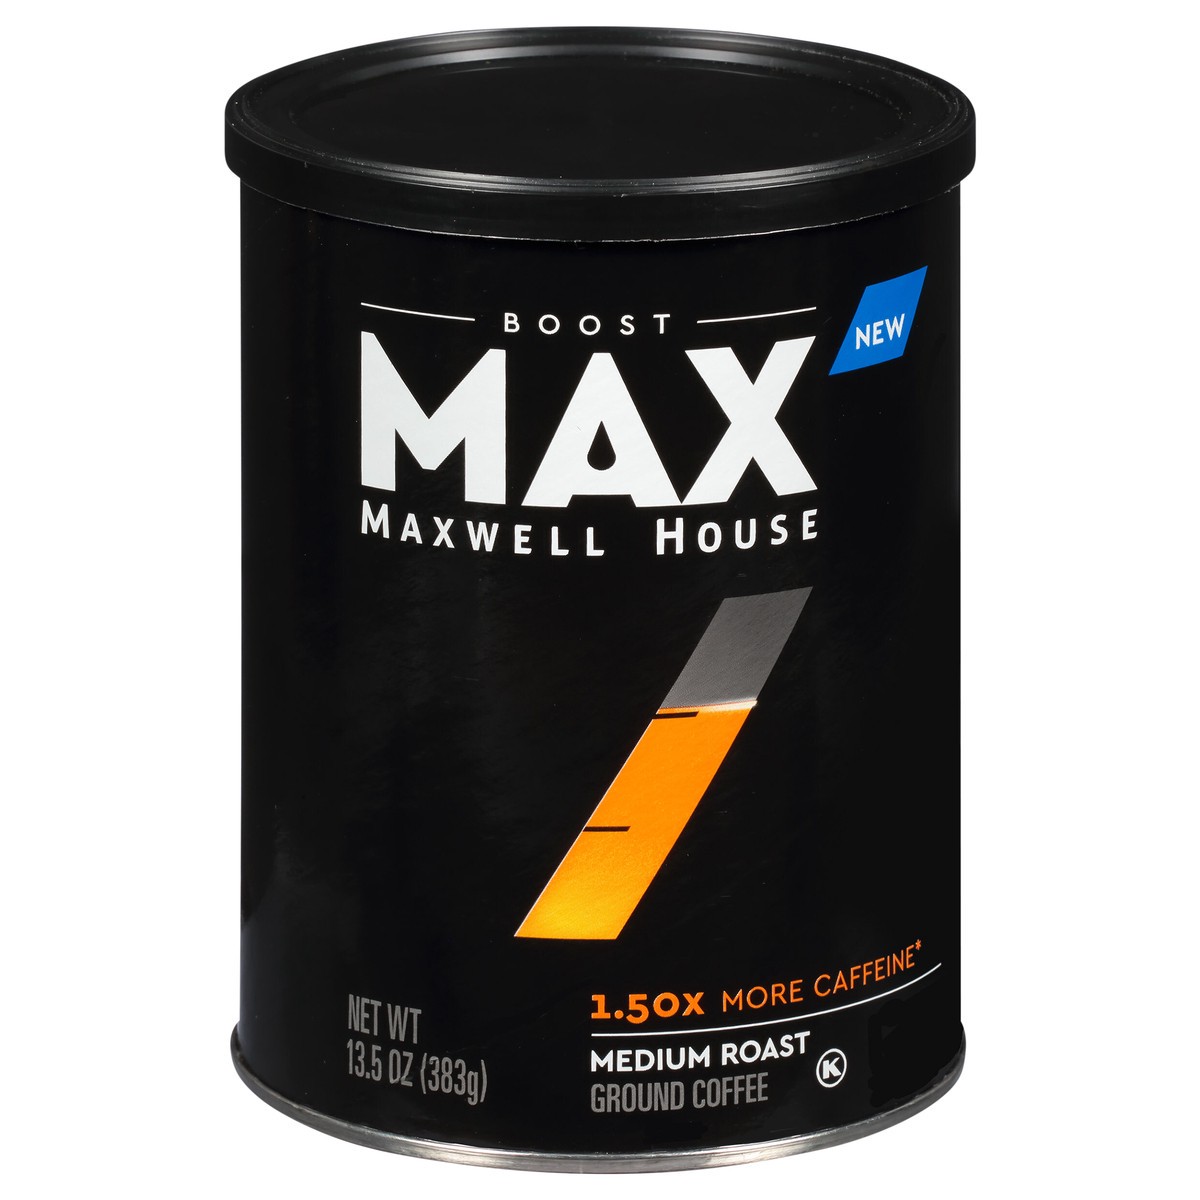 slide 1 of 7, Boost Max Maxwell House Max Boost Medium Roast Ground Coffee with 1.50X More Caffeine, 13.5 oz Canister, 13.5 oz